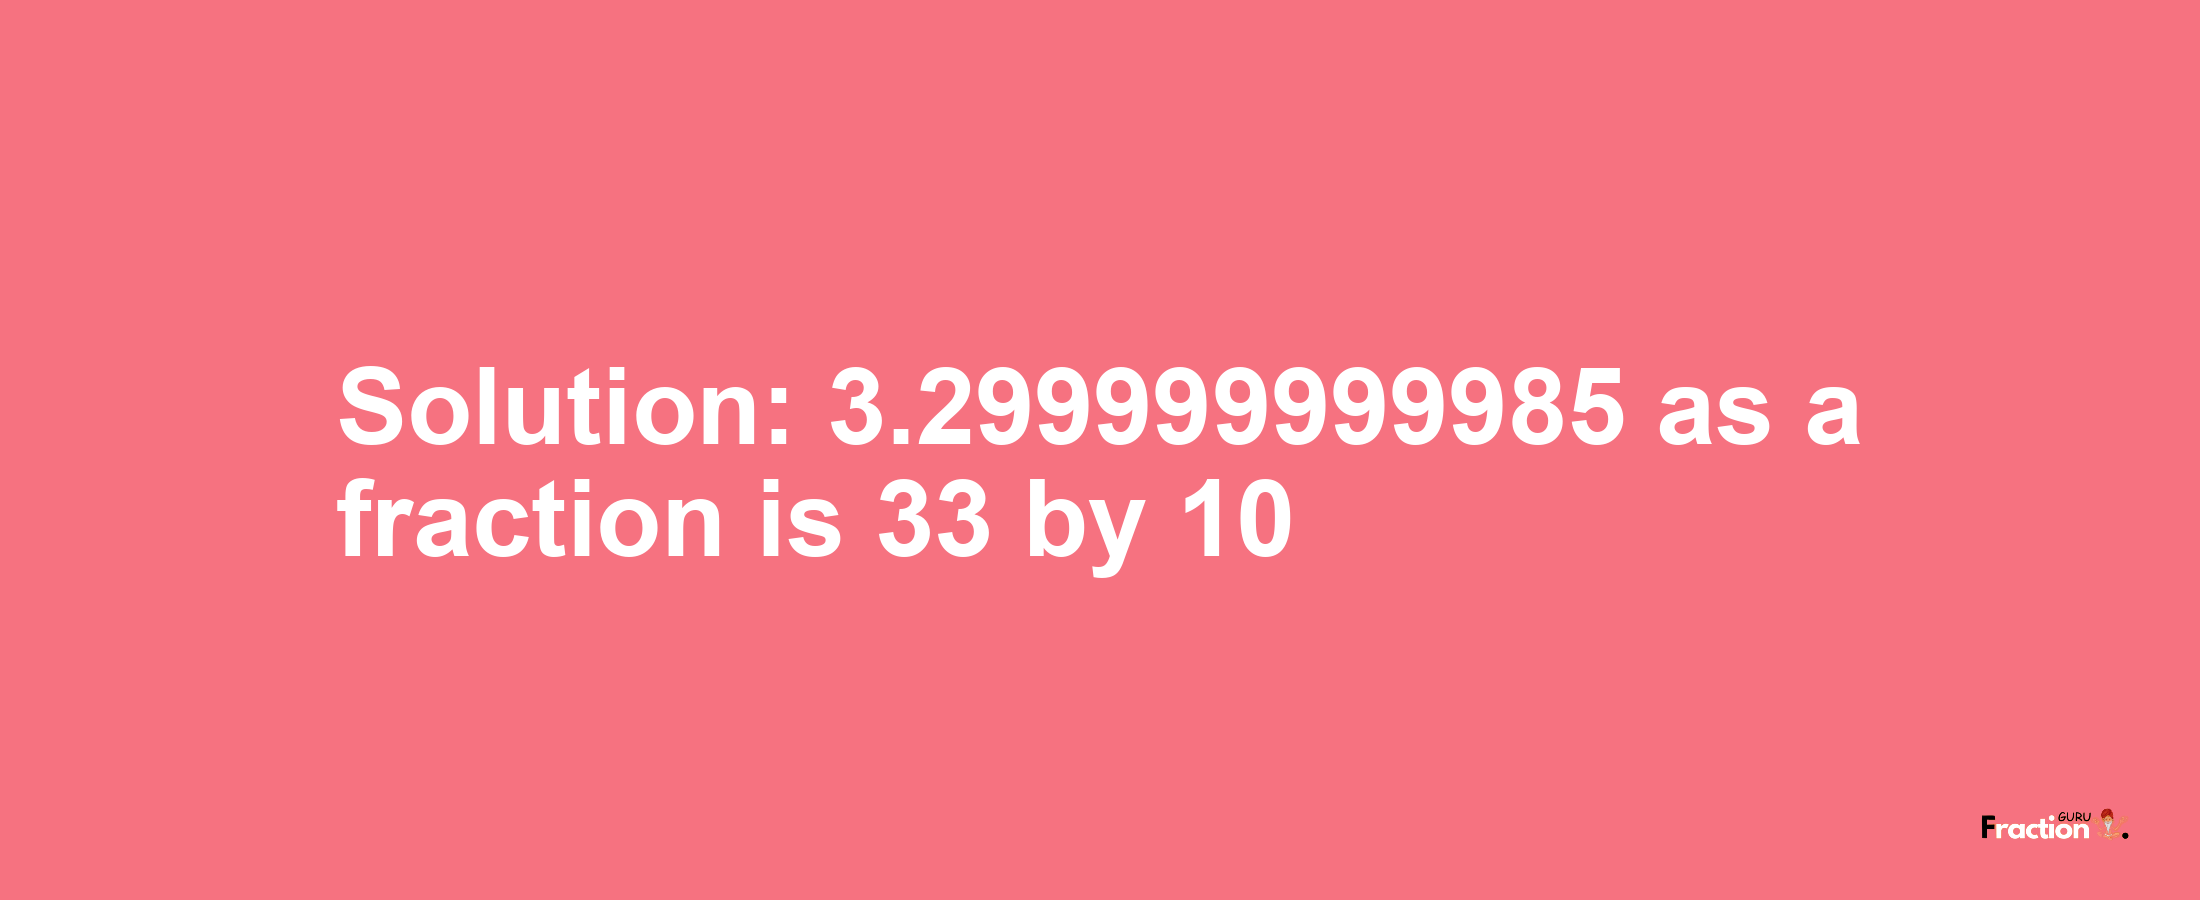 Solution:3.299999999985 as a fraction is 33/10